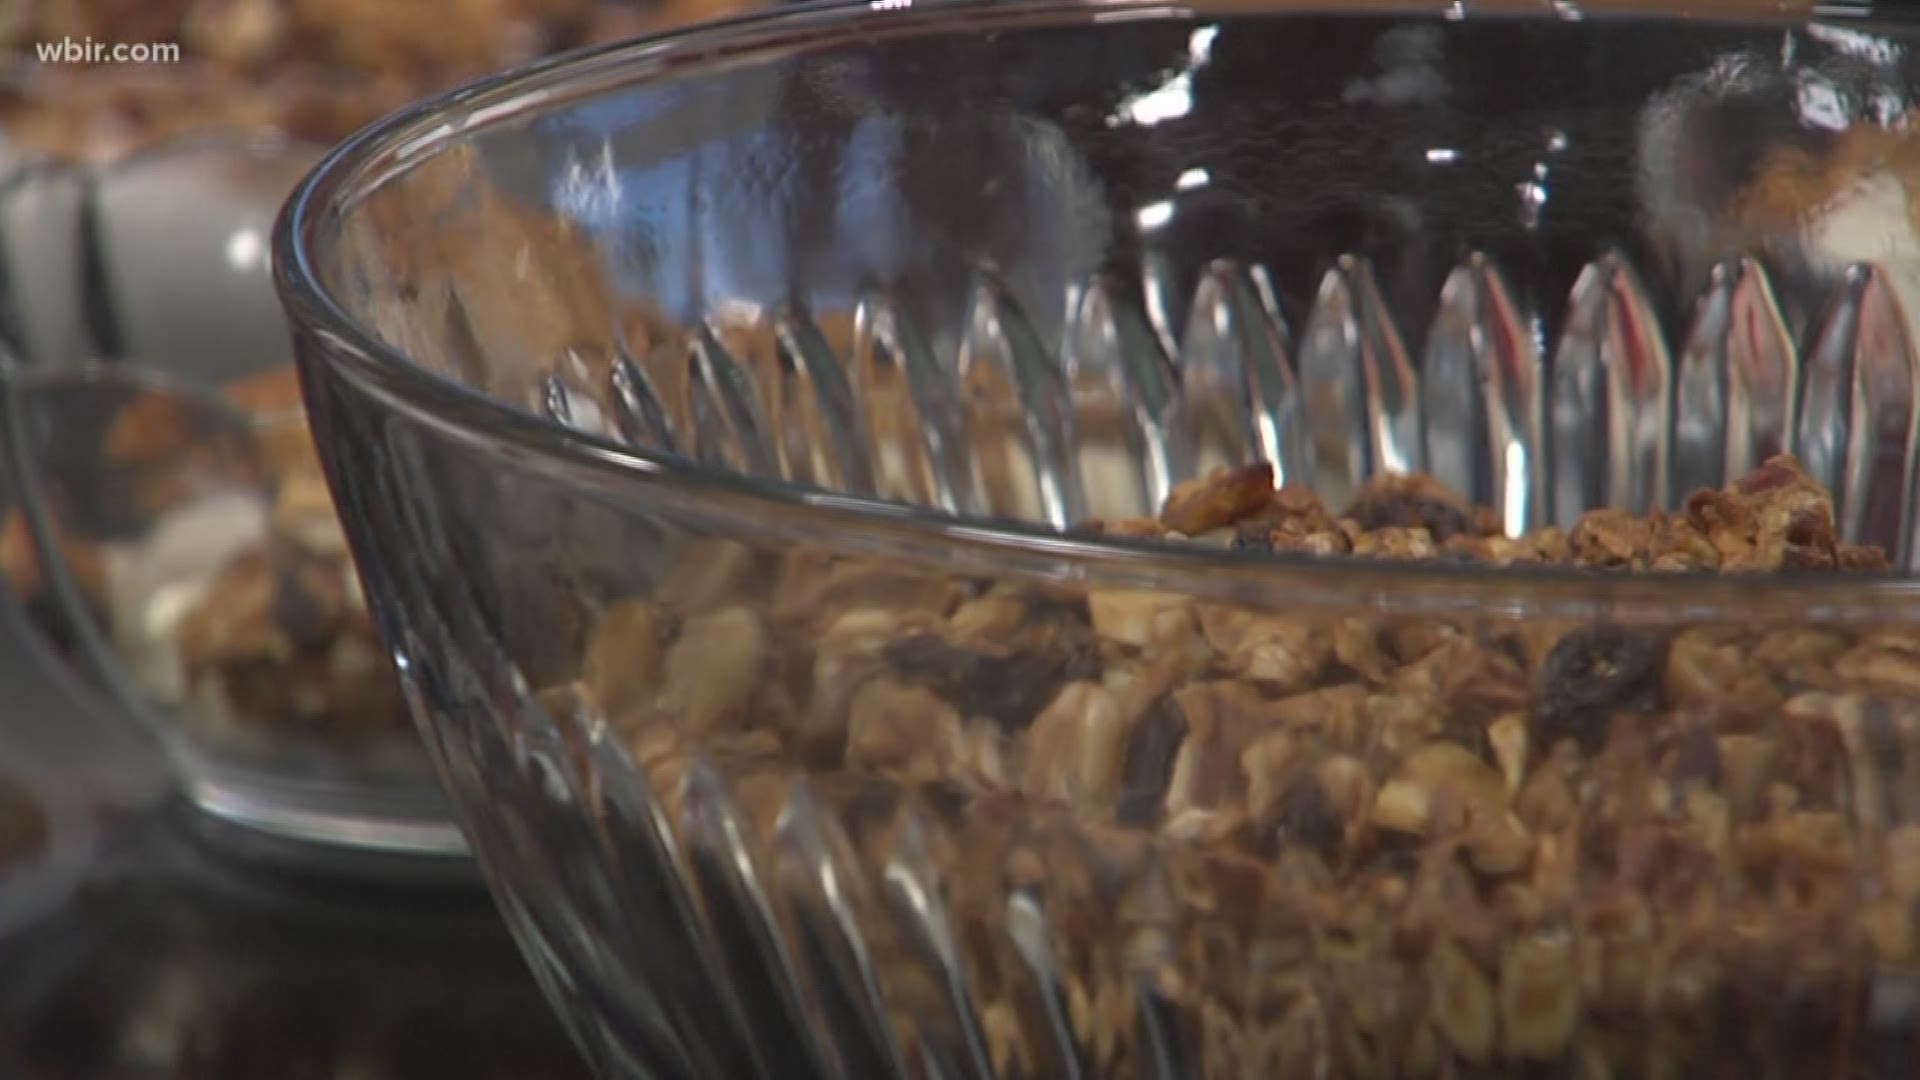 We are in the kitchen now with Virginia Turner, a clinical nutrition manager at UT Medical Center, and we are making a healthy fall snack: pumpkin granola.